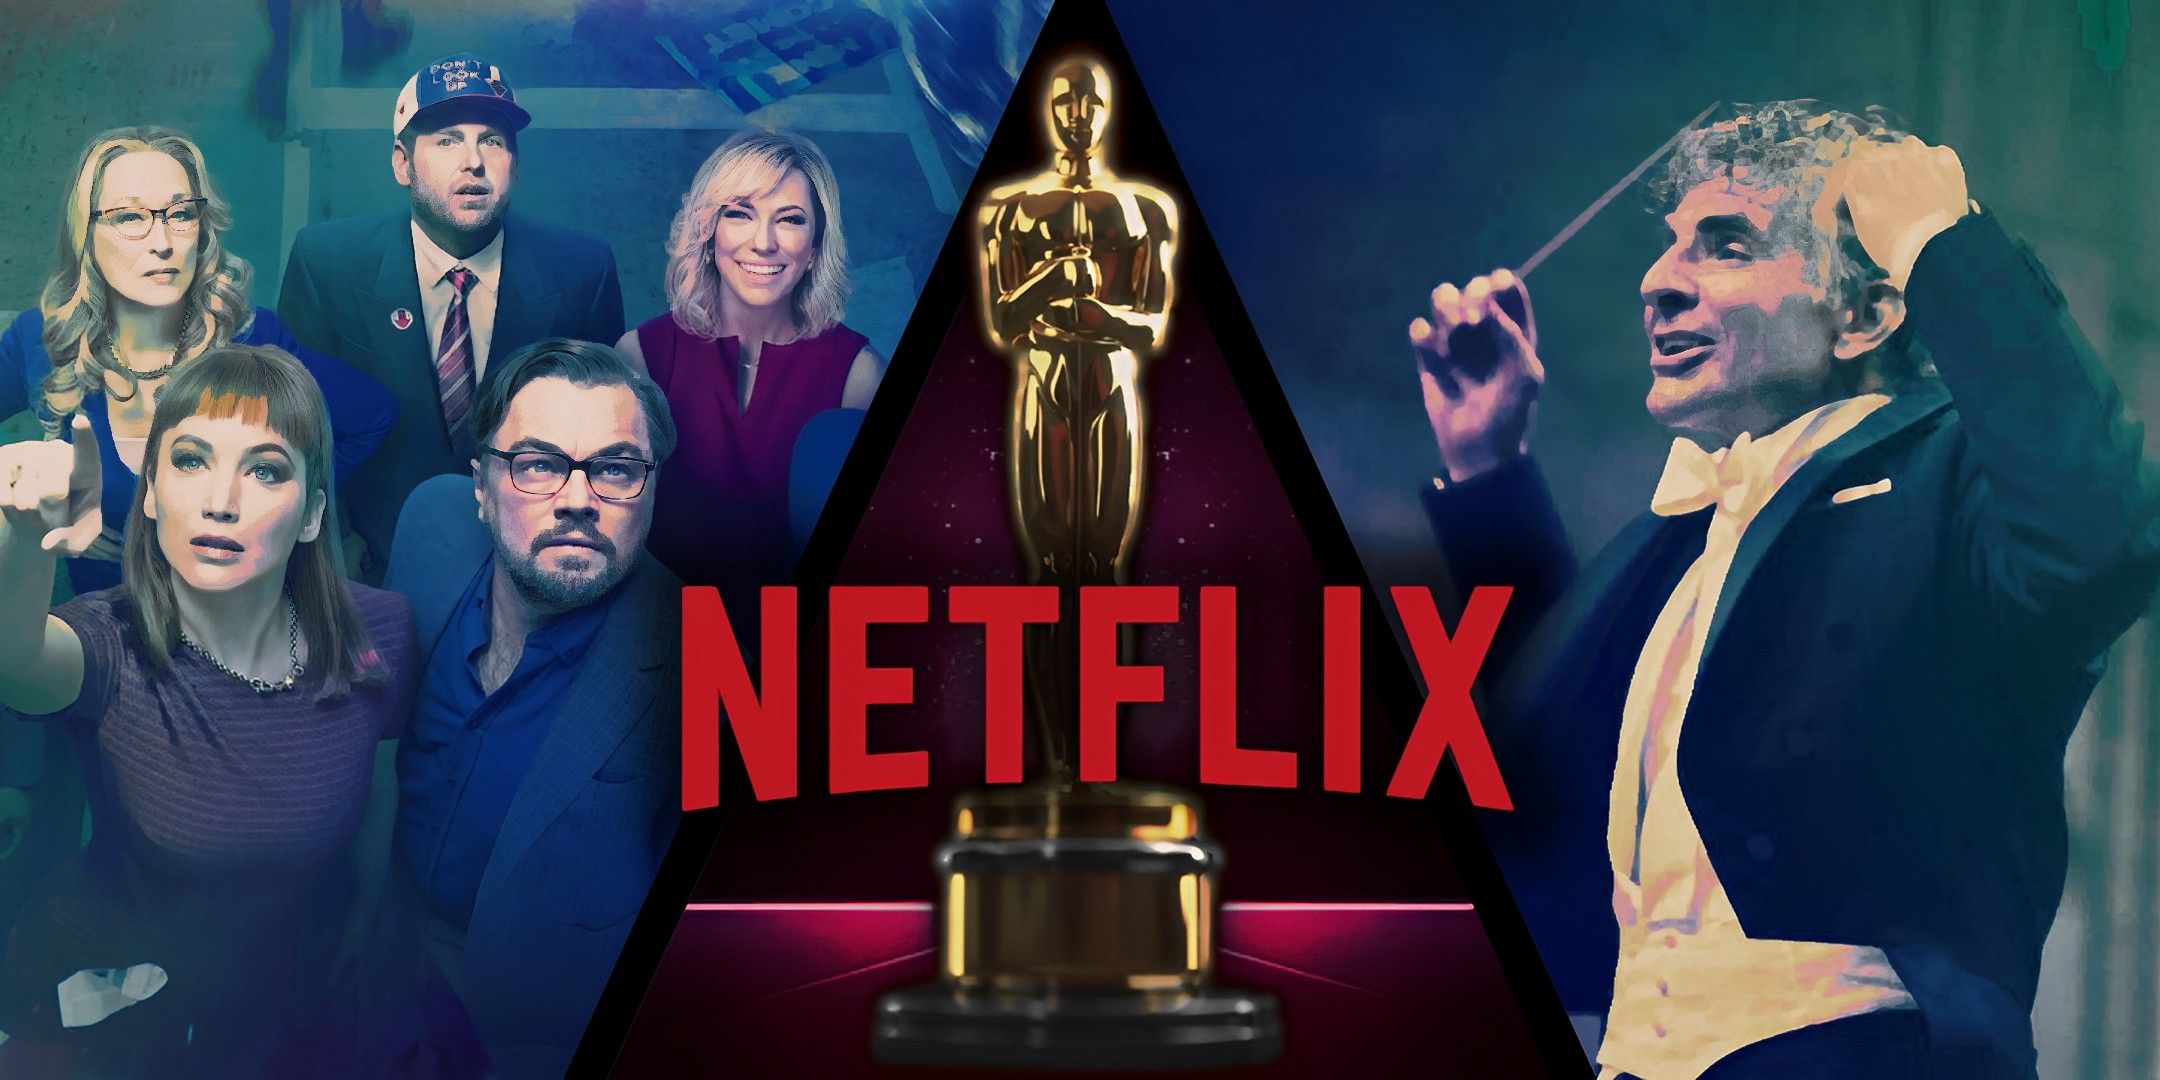 The Oscars statue with Netflix logo alongside Don’t Look Up poster and Bradley Cooper in Maestro.